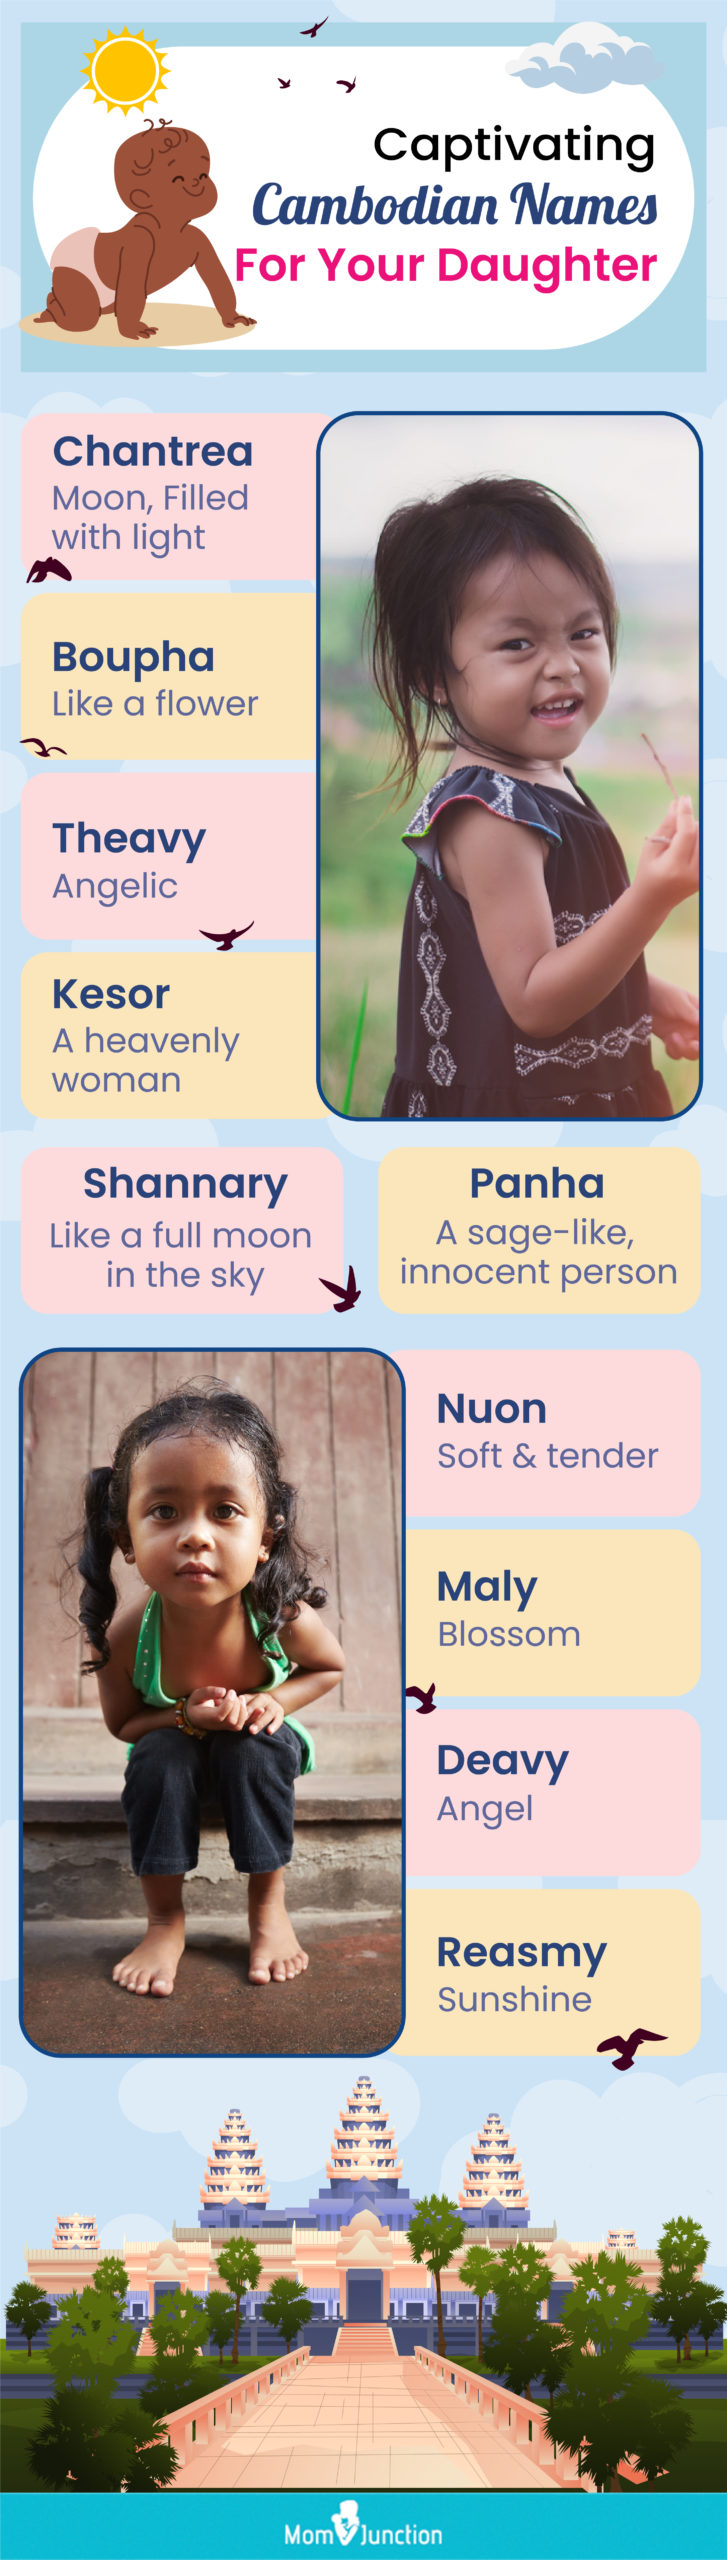 captivating cambodian names for your daughter (infographic)